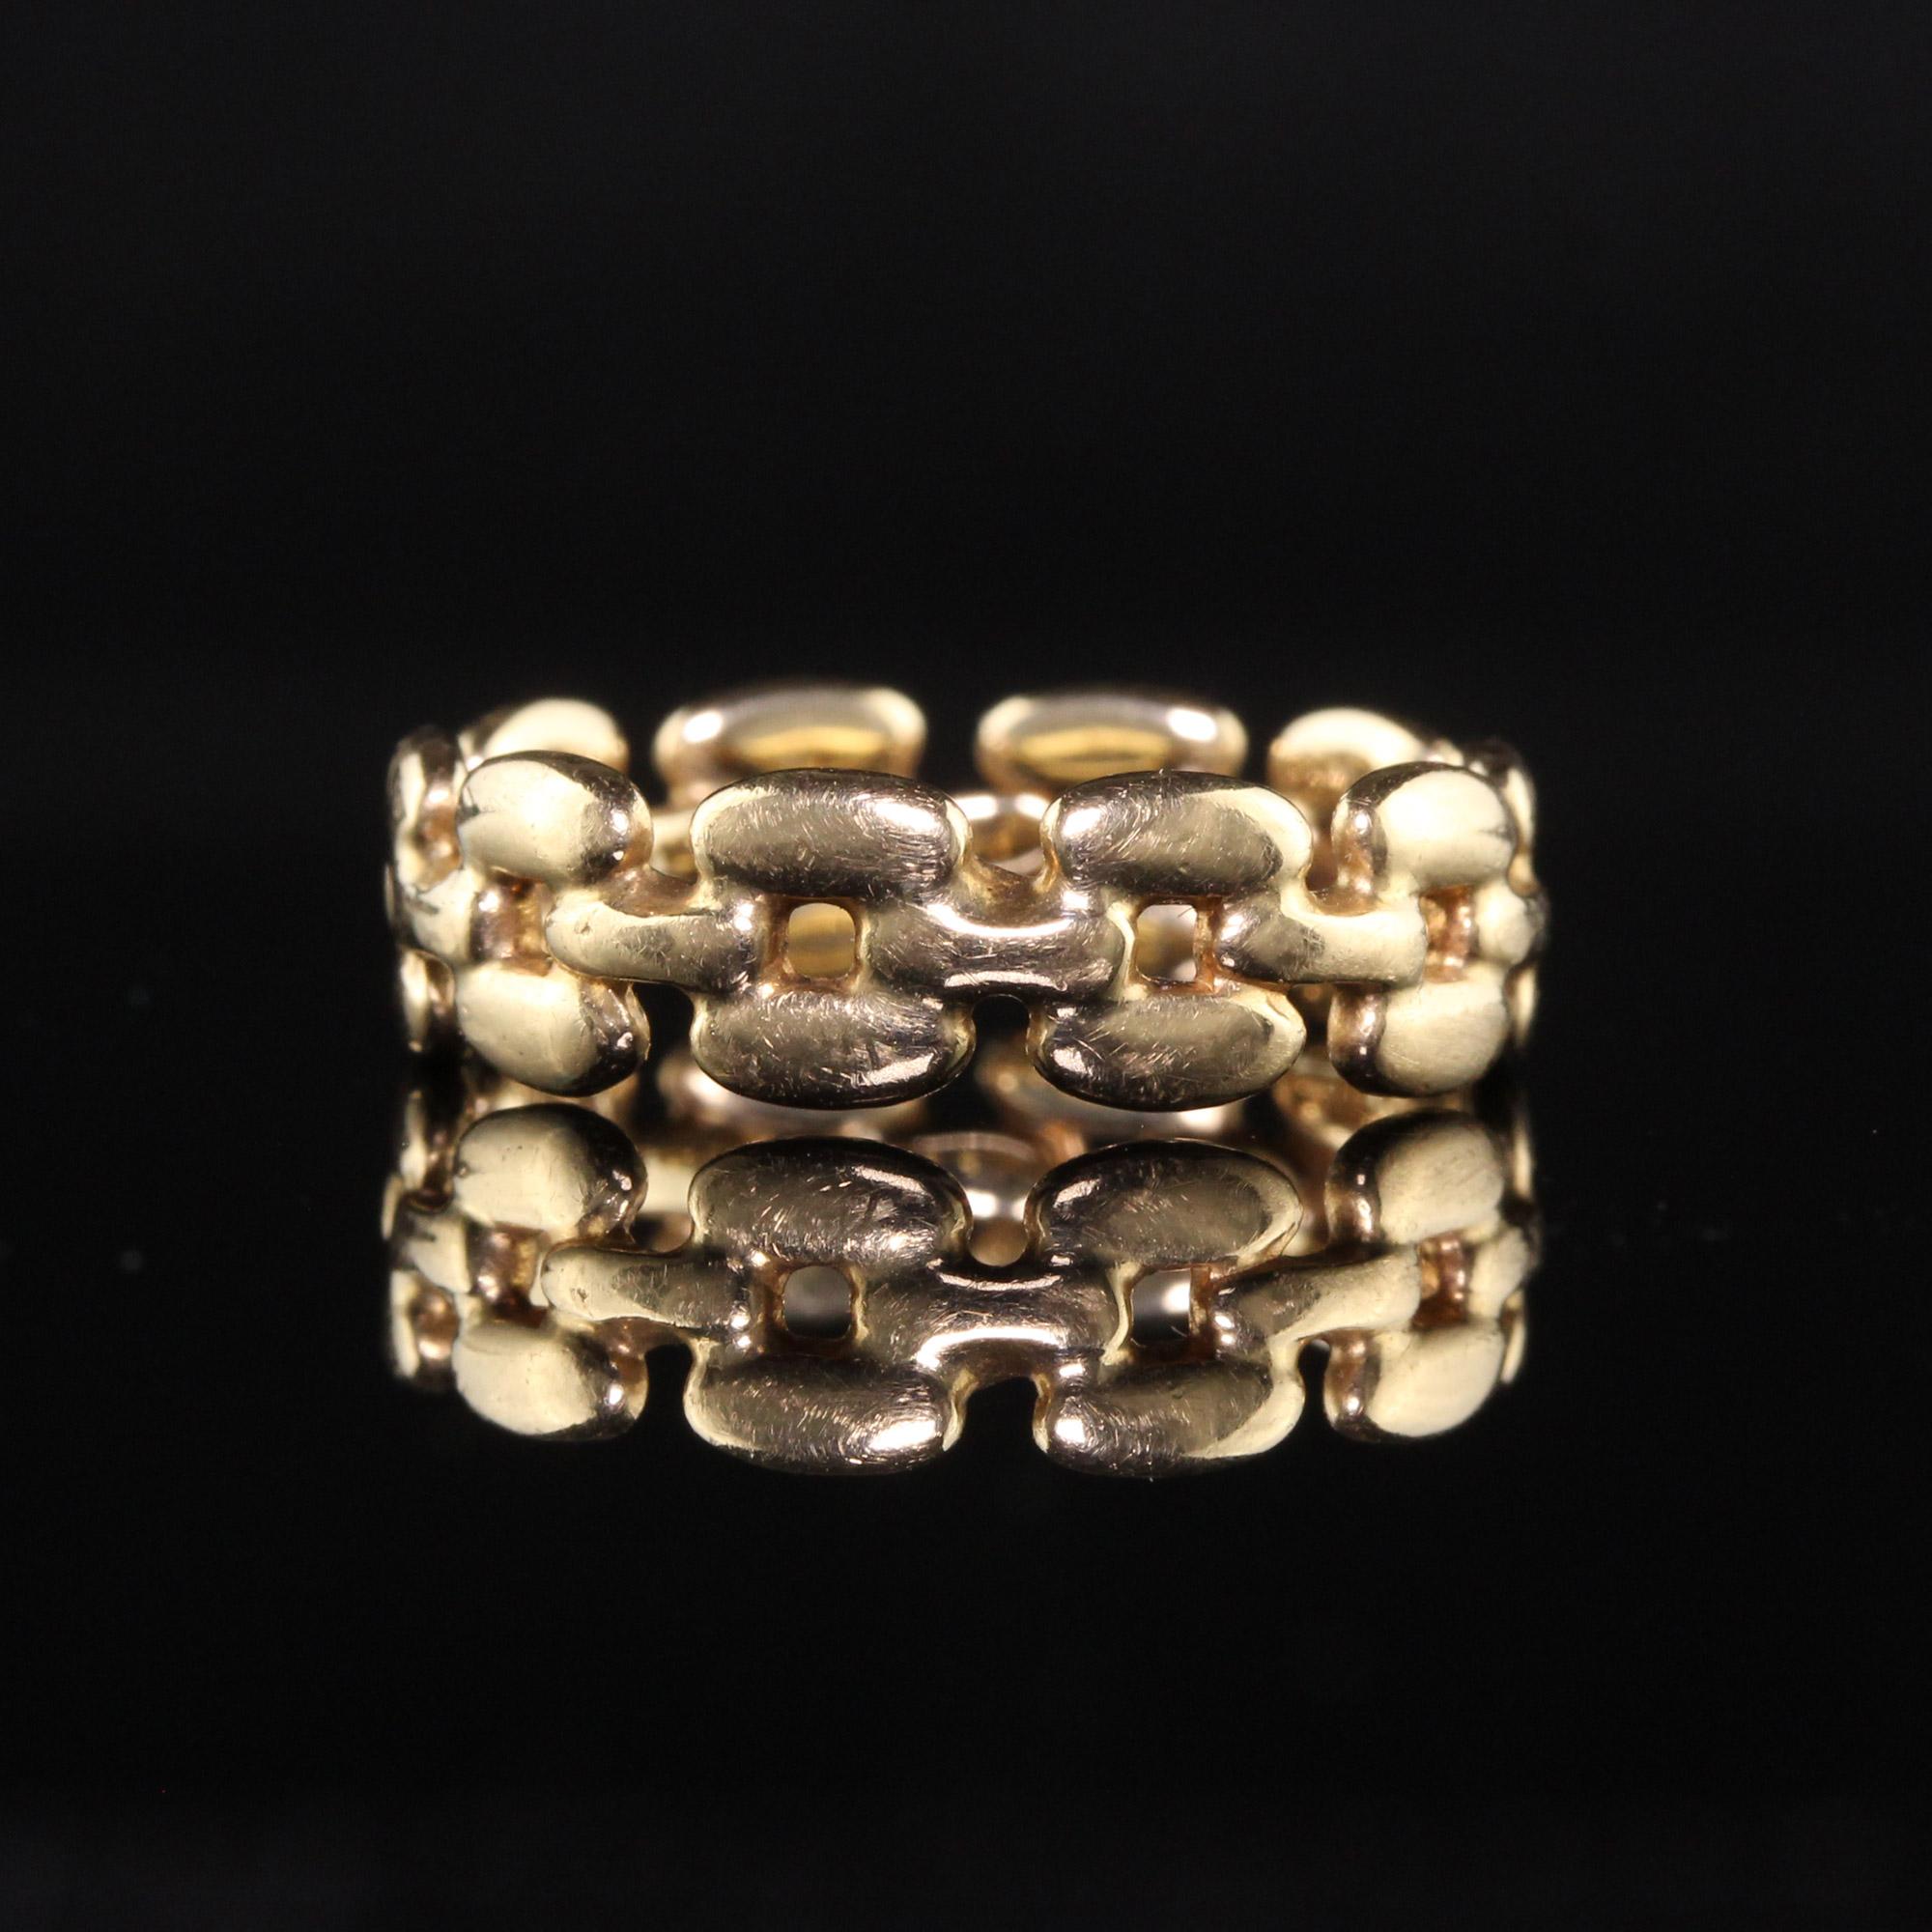 Vintage Estate 14K Yellow Gold Link Wedding Band In Good Condition For Sale In Great Neck, NY